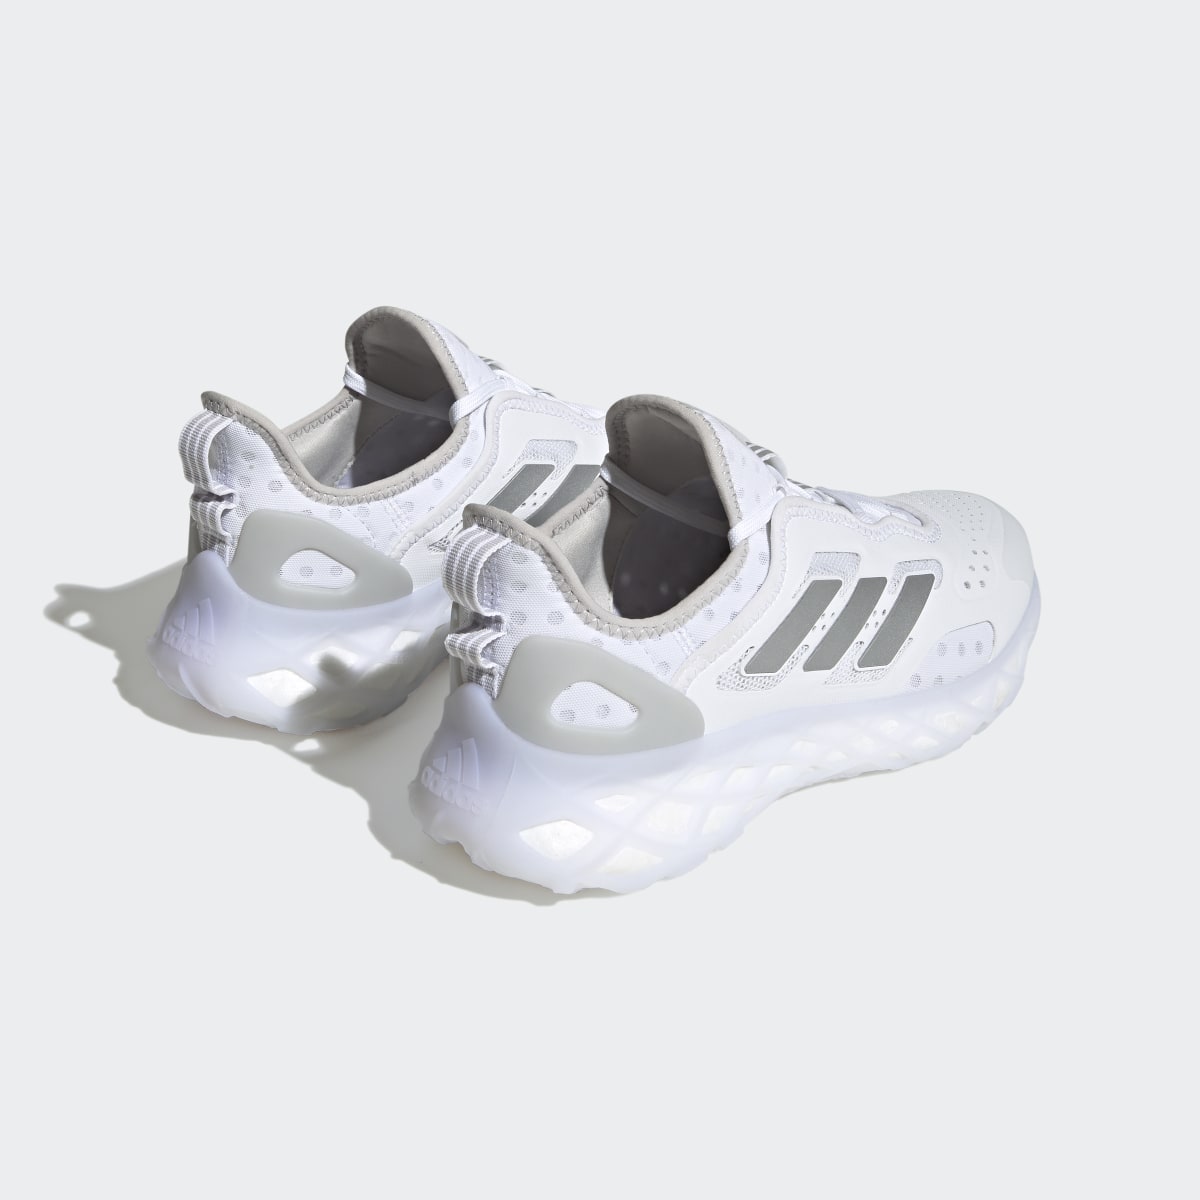 Adidas Web Boost Shoes. 6